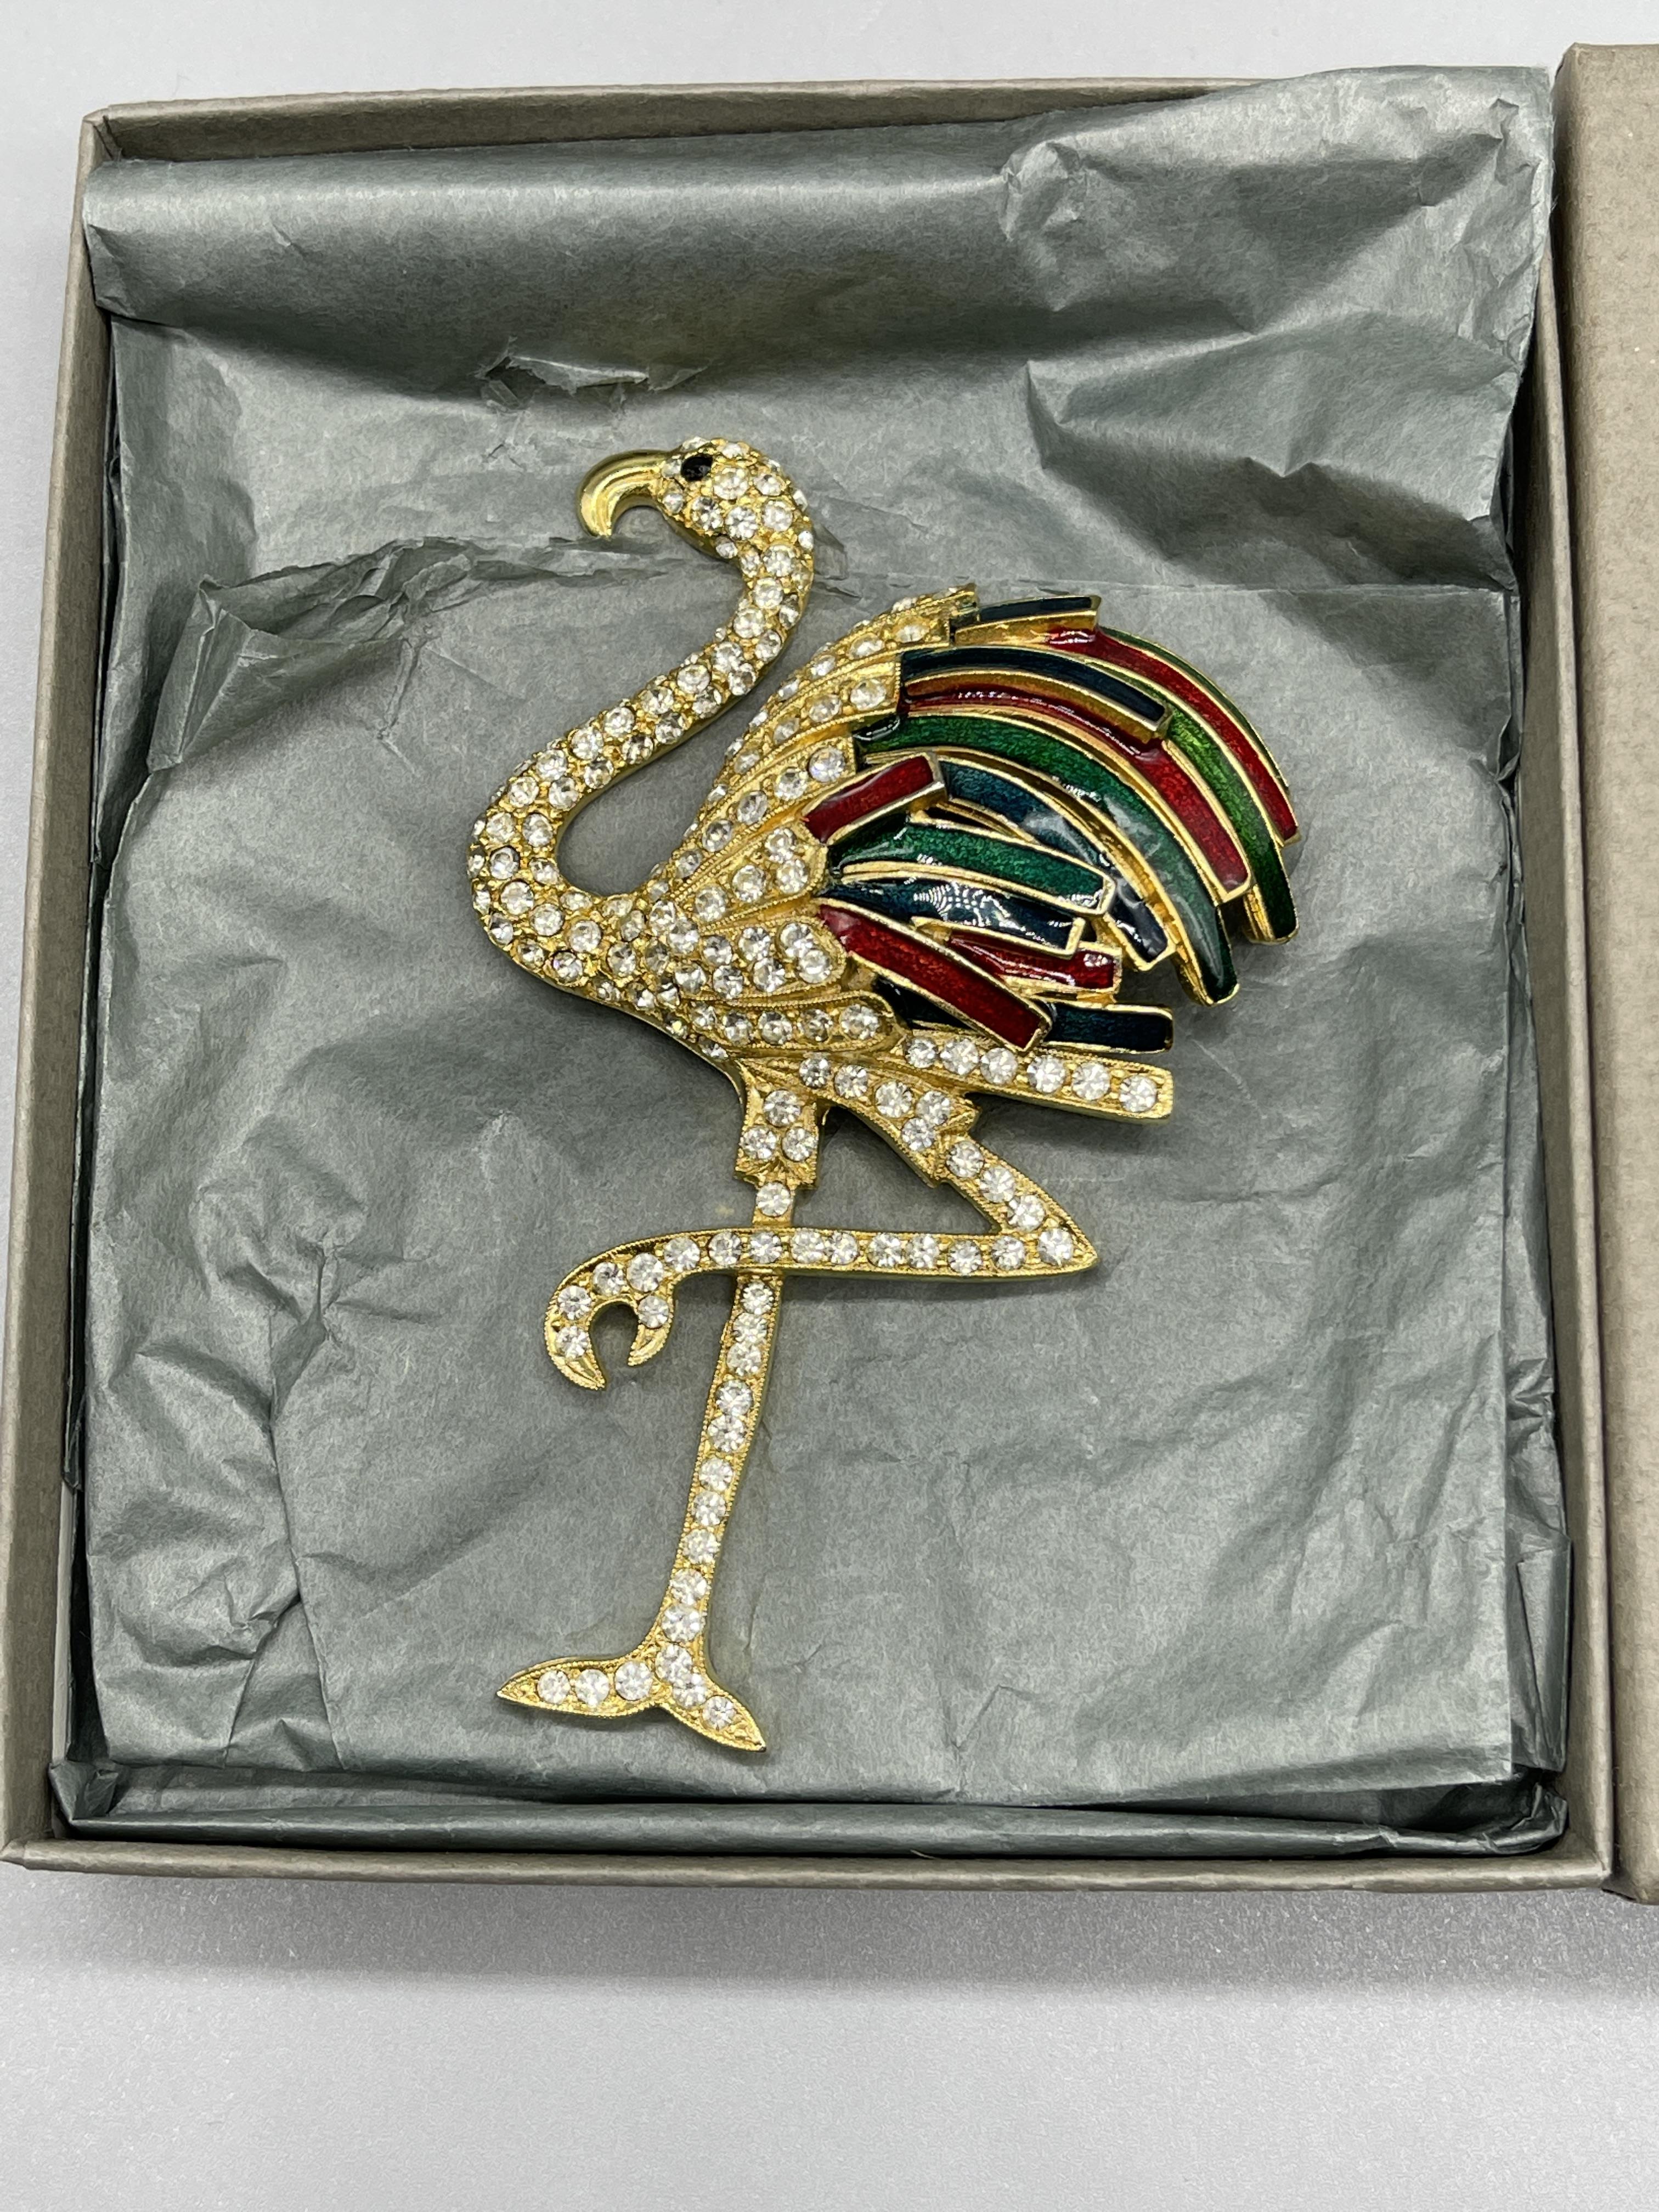 Boxed Butler and Wilson flamingo brooch - Image 7 of 7